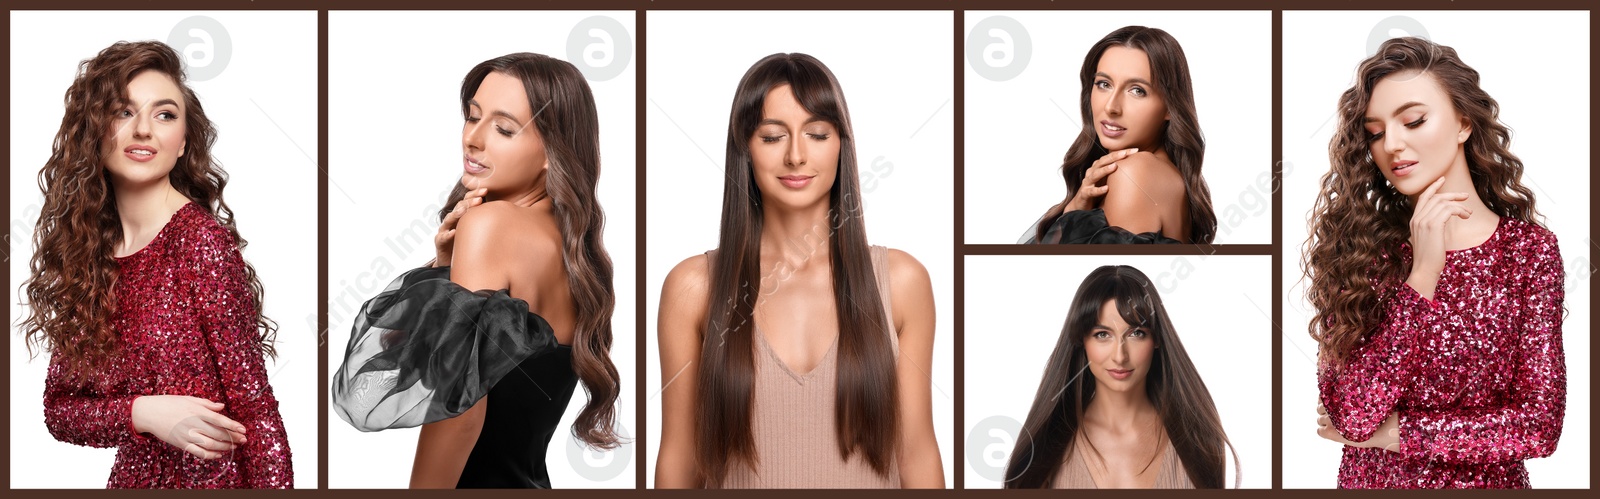 Image of Beautiful women with different hairstylings on white background. Collage of photos